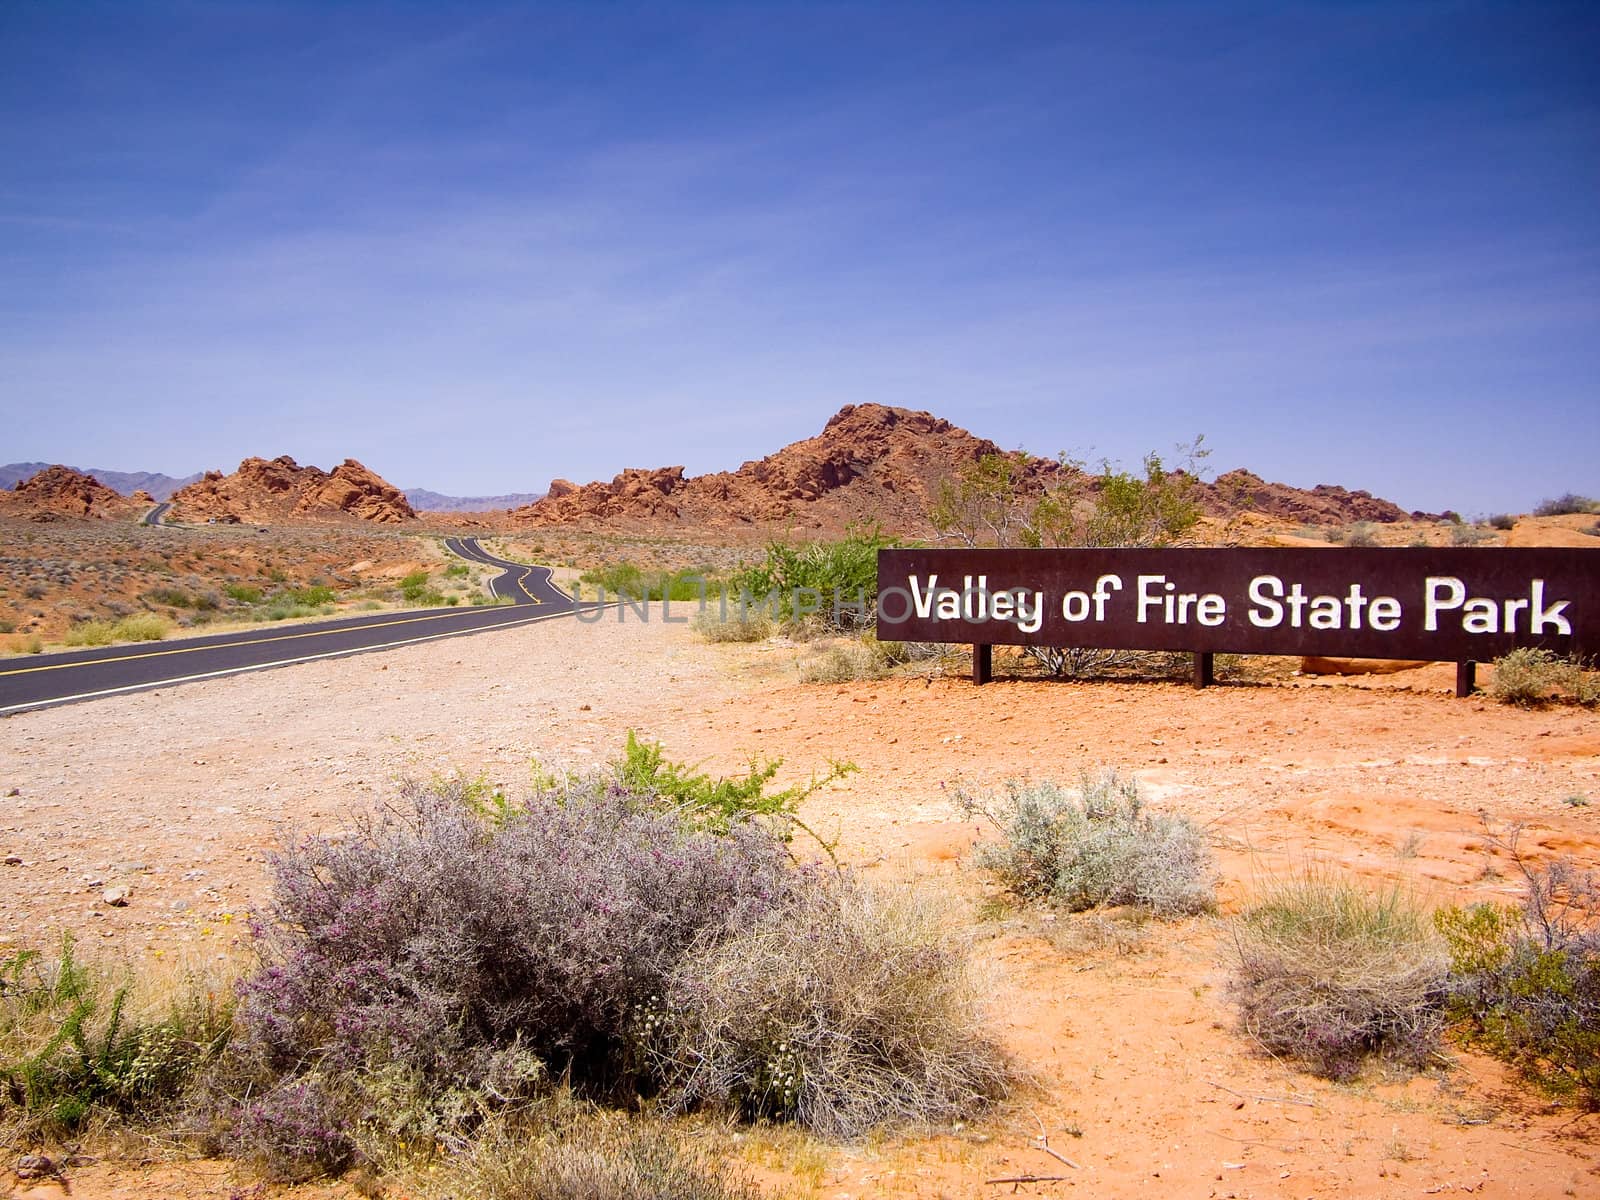 Valley of Fire State Park Sign by emattil